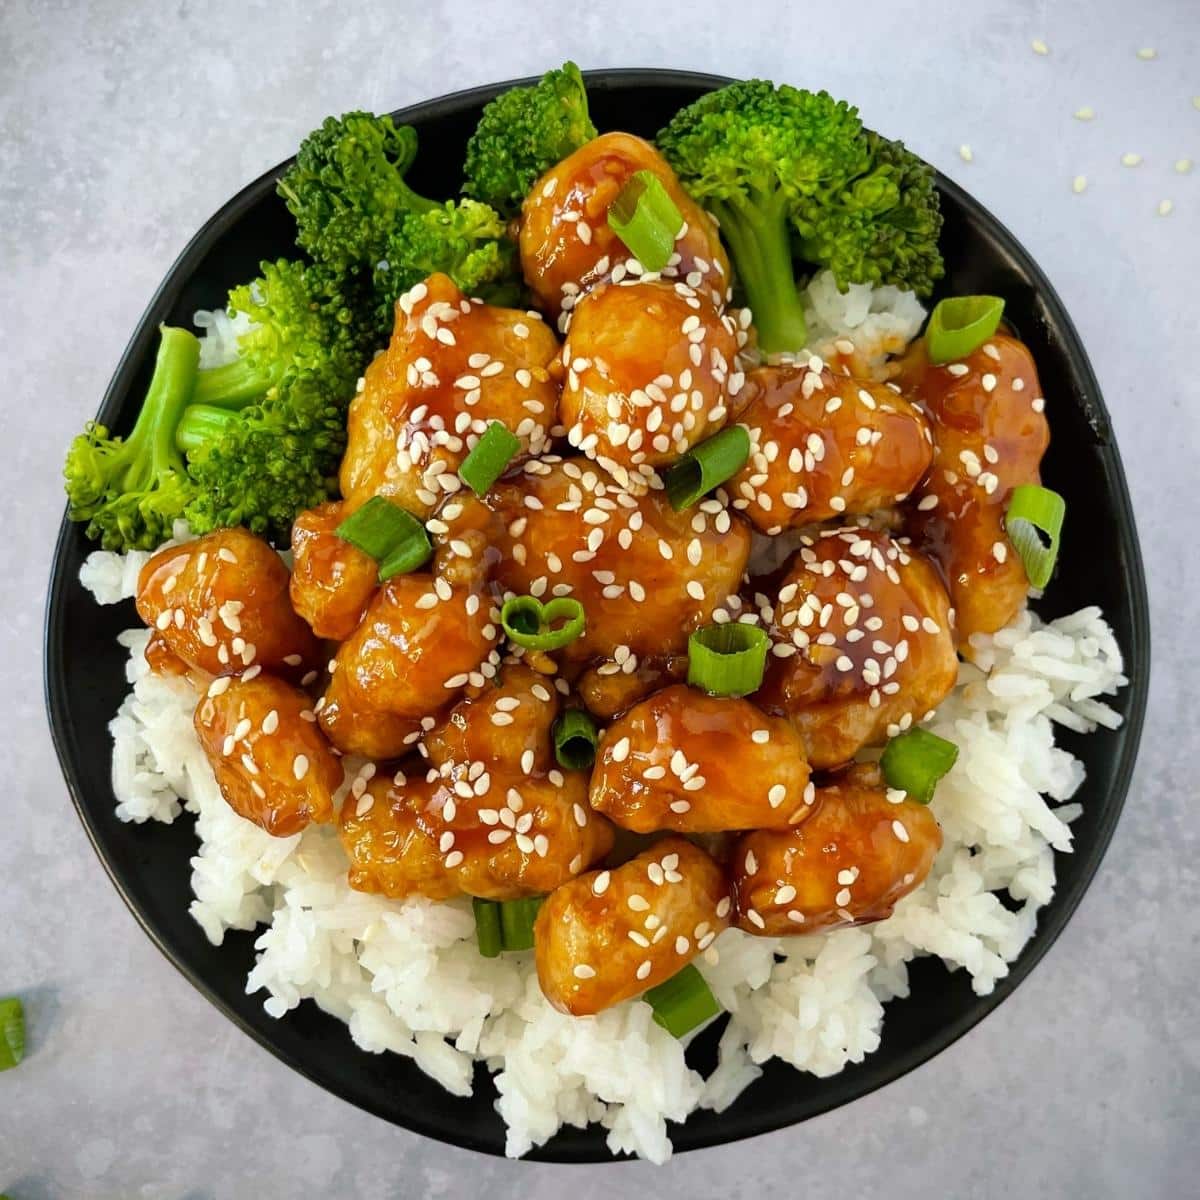 Plate of vegan sesame chicken on top of rice and broccoli.